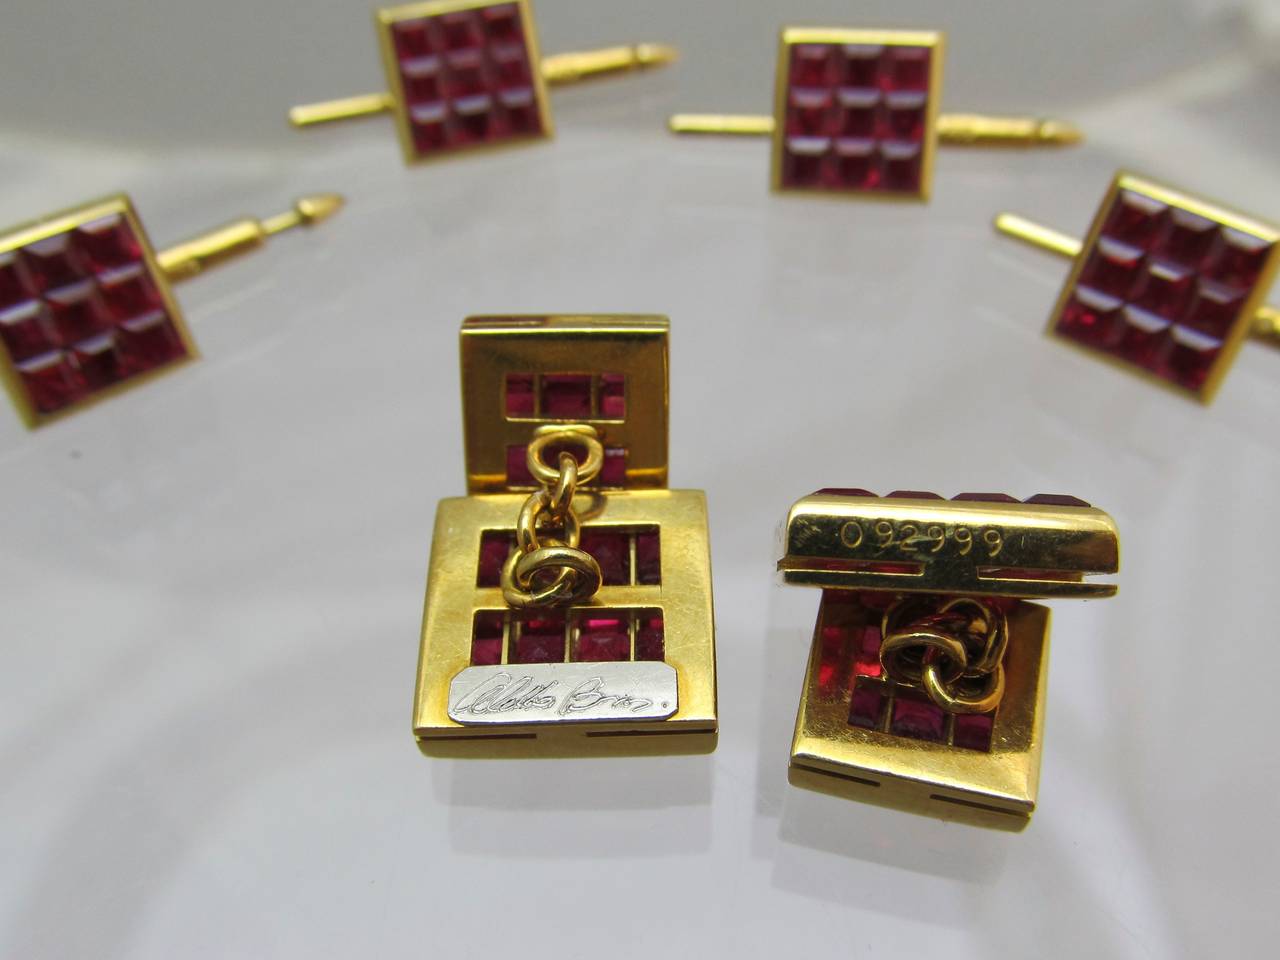 Unique invisibly set style  ruby dress set by Aletto Bros., designed as  a calibre-cut ruby square shaped 4 raw plaques with matching 4 shirt studs.

Estimated total weight of ruby is 18 carats.
18k gold. 
With it's original box
Maker's